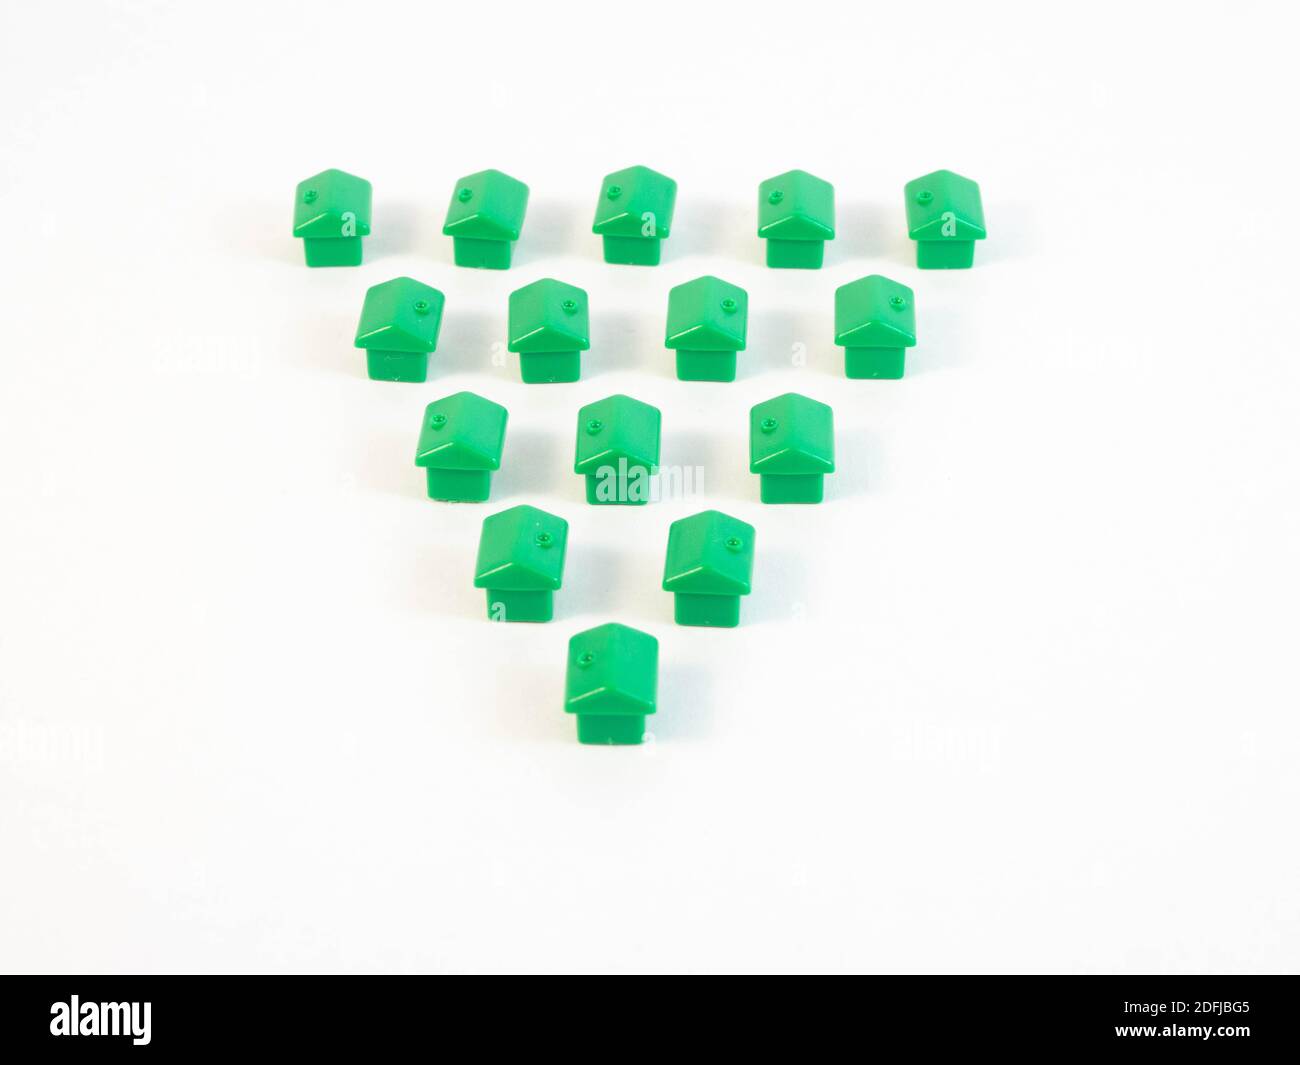 Green colored pawns in the shape of a house with gold coins. Concept around housing and real estate agents. Stock Photo